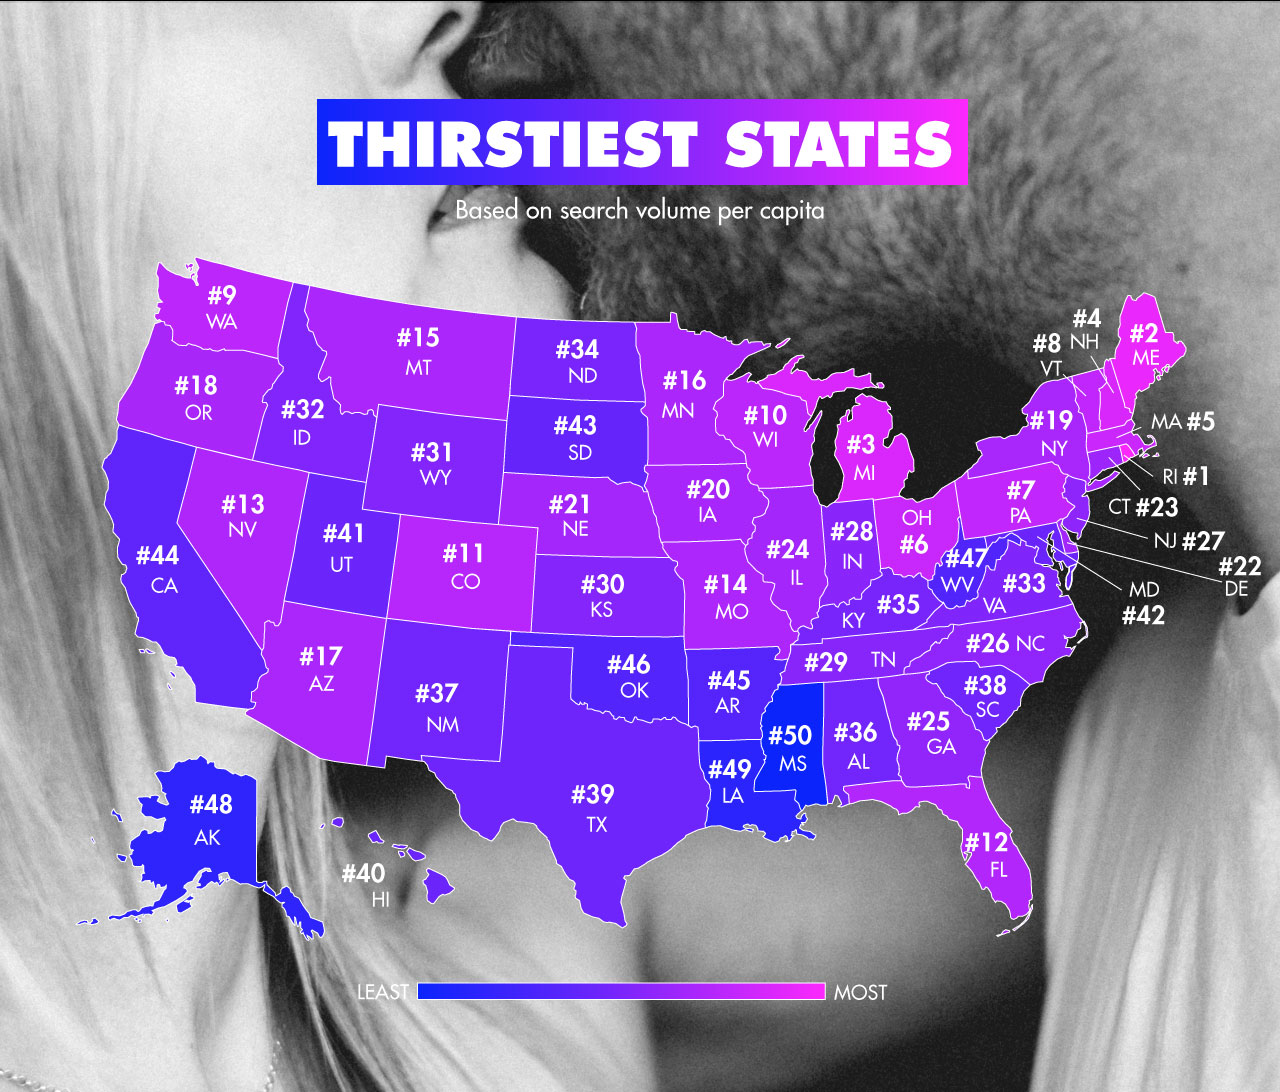 Where Are Tinder Users Trying to Get Laid the Most?